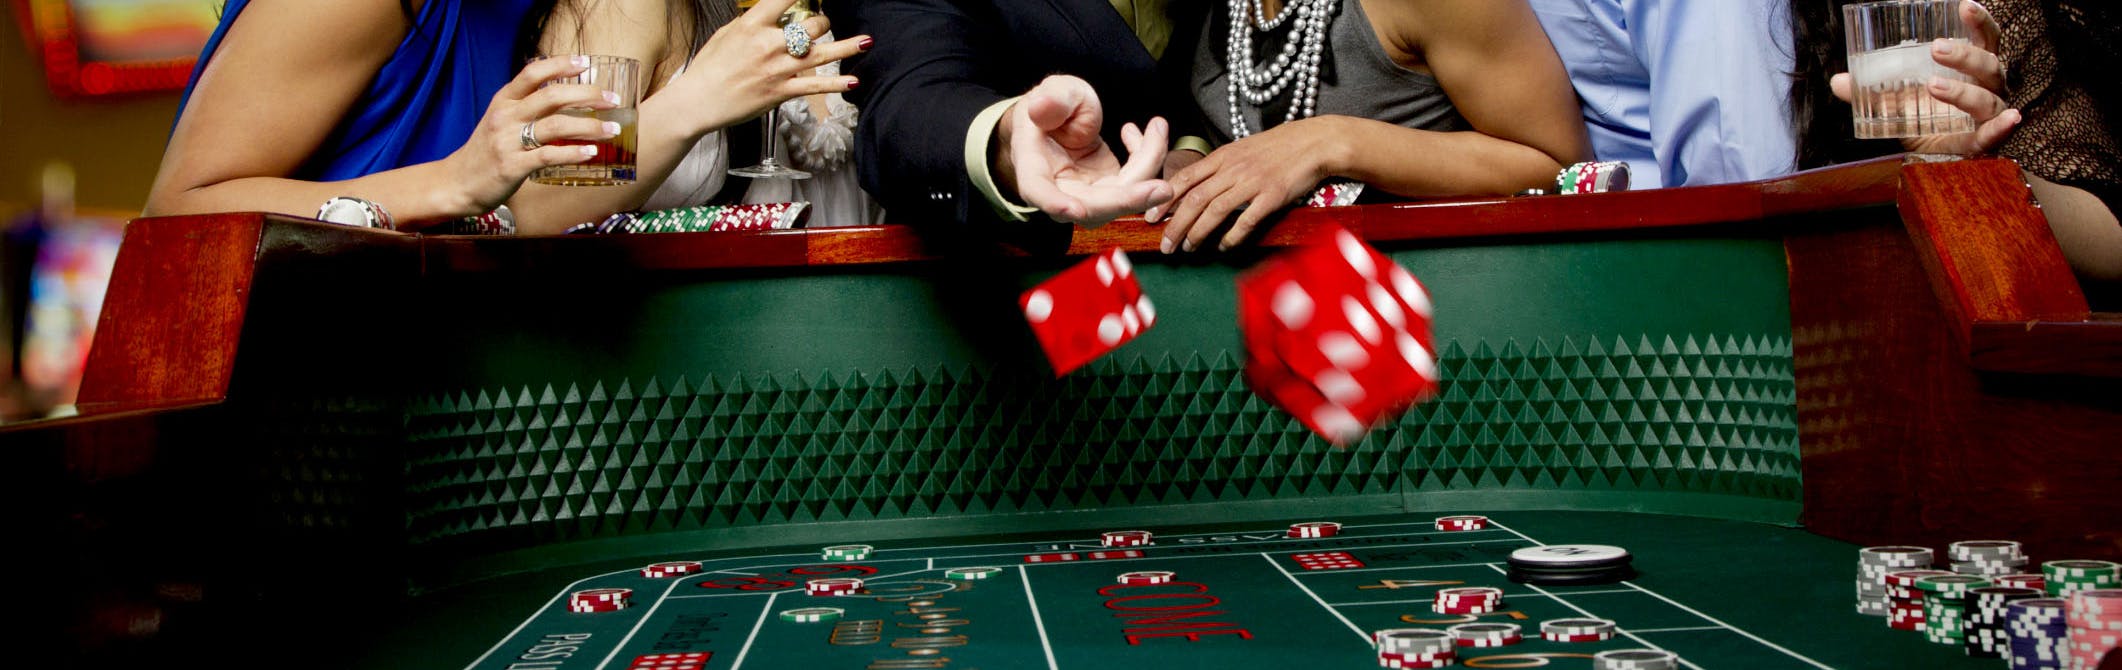 Live Casino Technology: How It Works